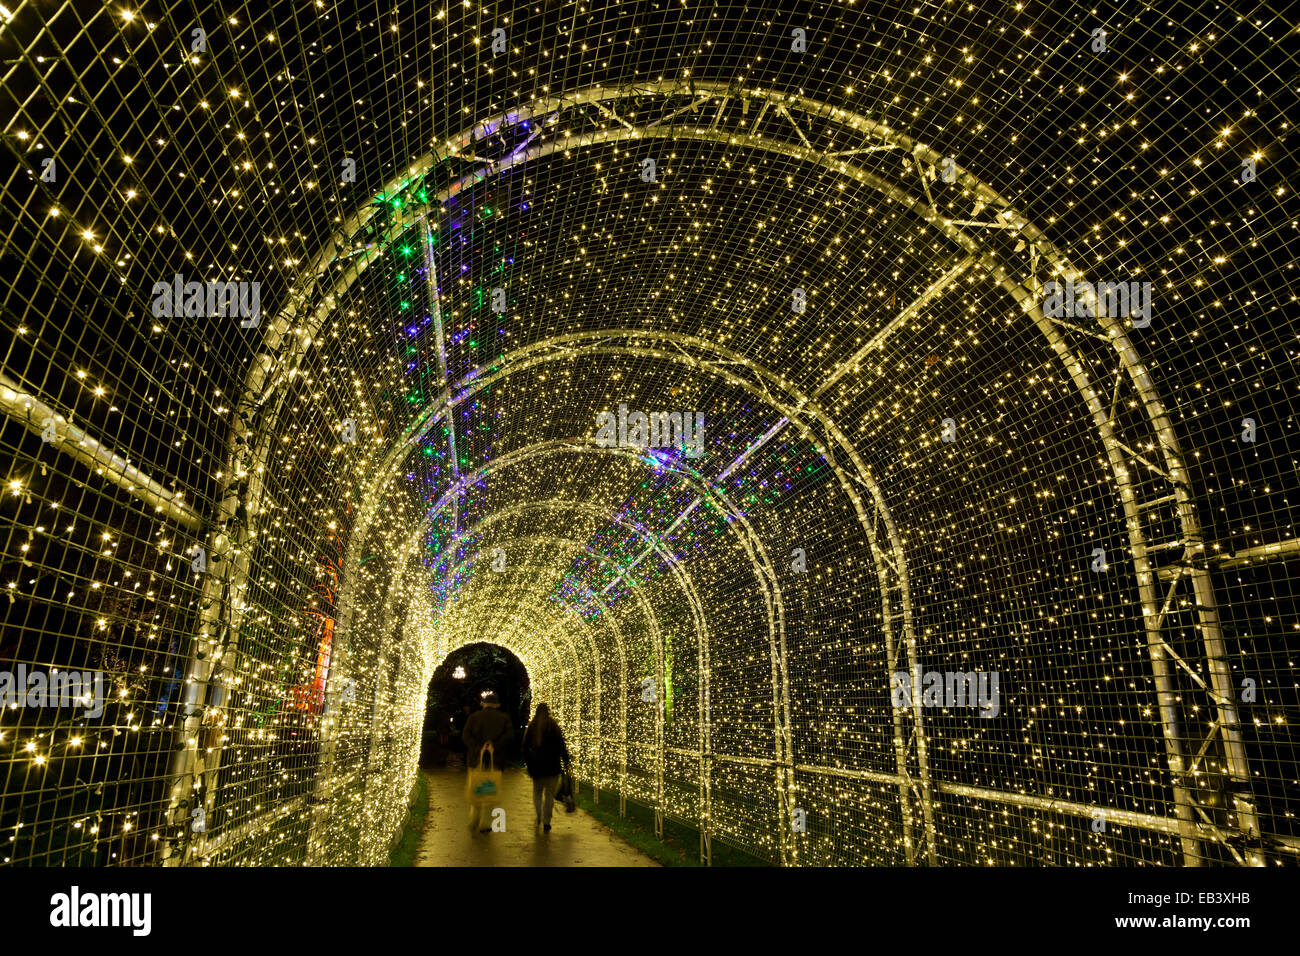 London, UK. 25 November 2014. A tunnel of lights. Press preview of the seasonal illuminations lighting Kew Gardens after dark. Kew Gardens opens a new trail for the 2014 Christmas period (26 November 2014 to 3 January 2015) with illuminated buildings such as the Palm House, a fire garden and a tunnel of lights. There is also a series of botanically inspired, large scale light installations, created by French design studio TILT. Visitors can purchase tickets for the evening entrance from 5pm to 10pm. Credit:  Nick Savage/Alamy Live News Stock Photo